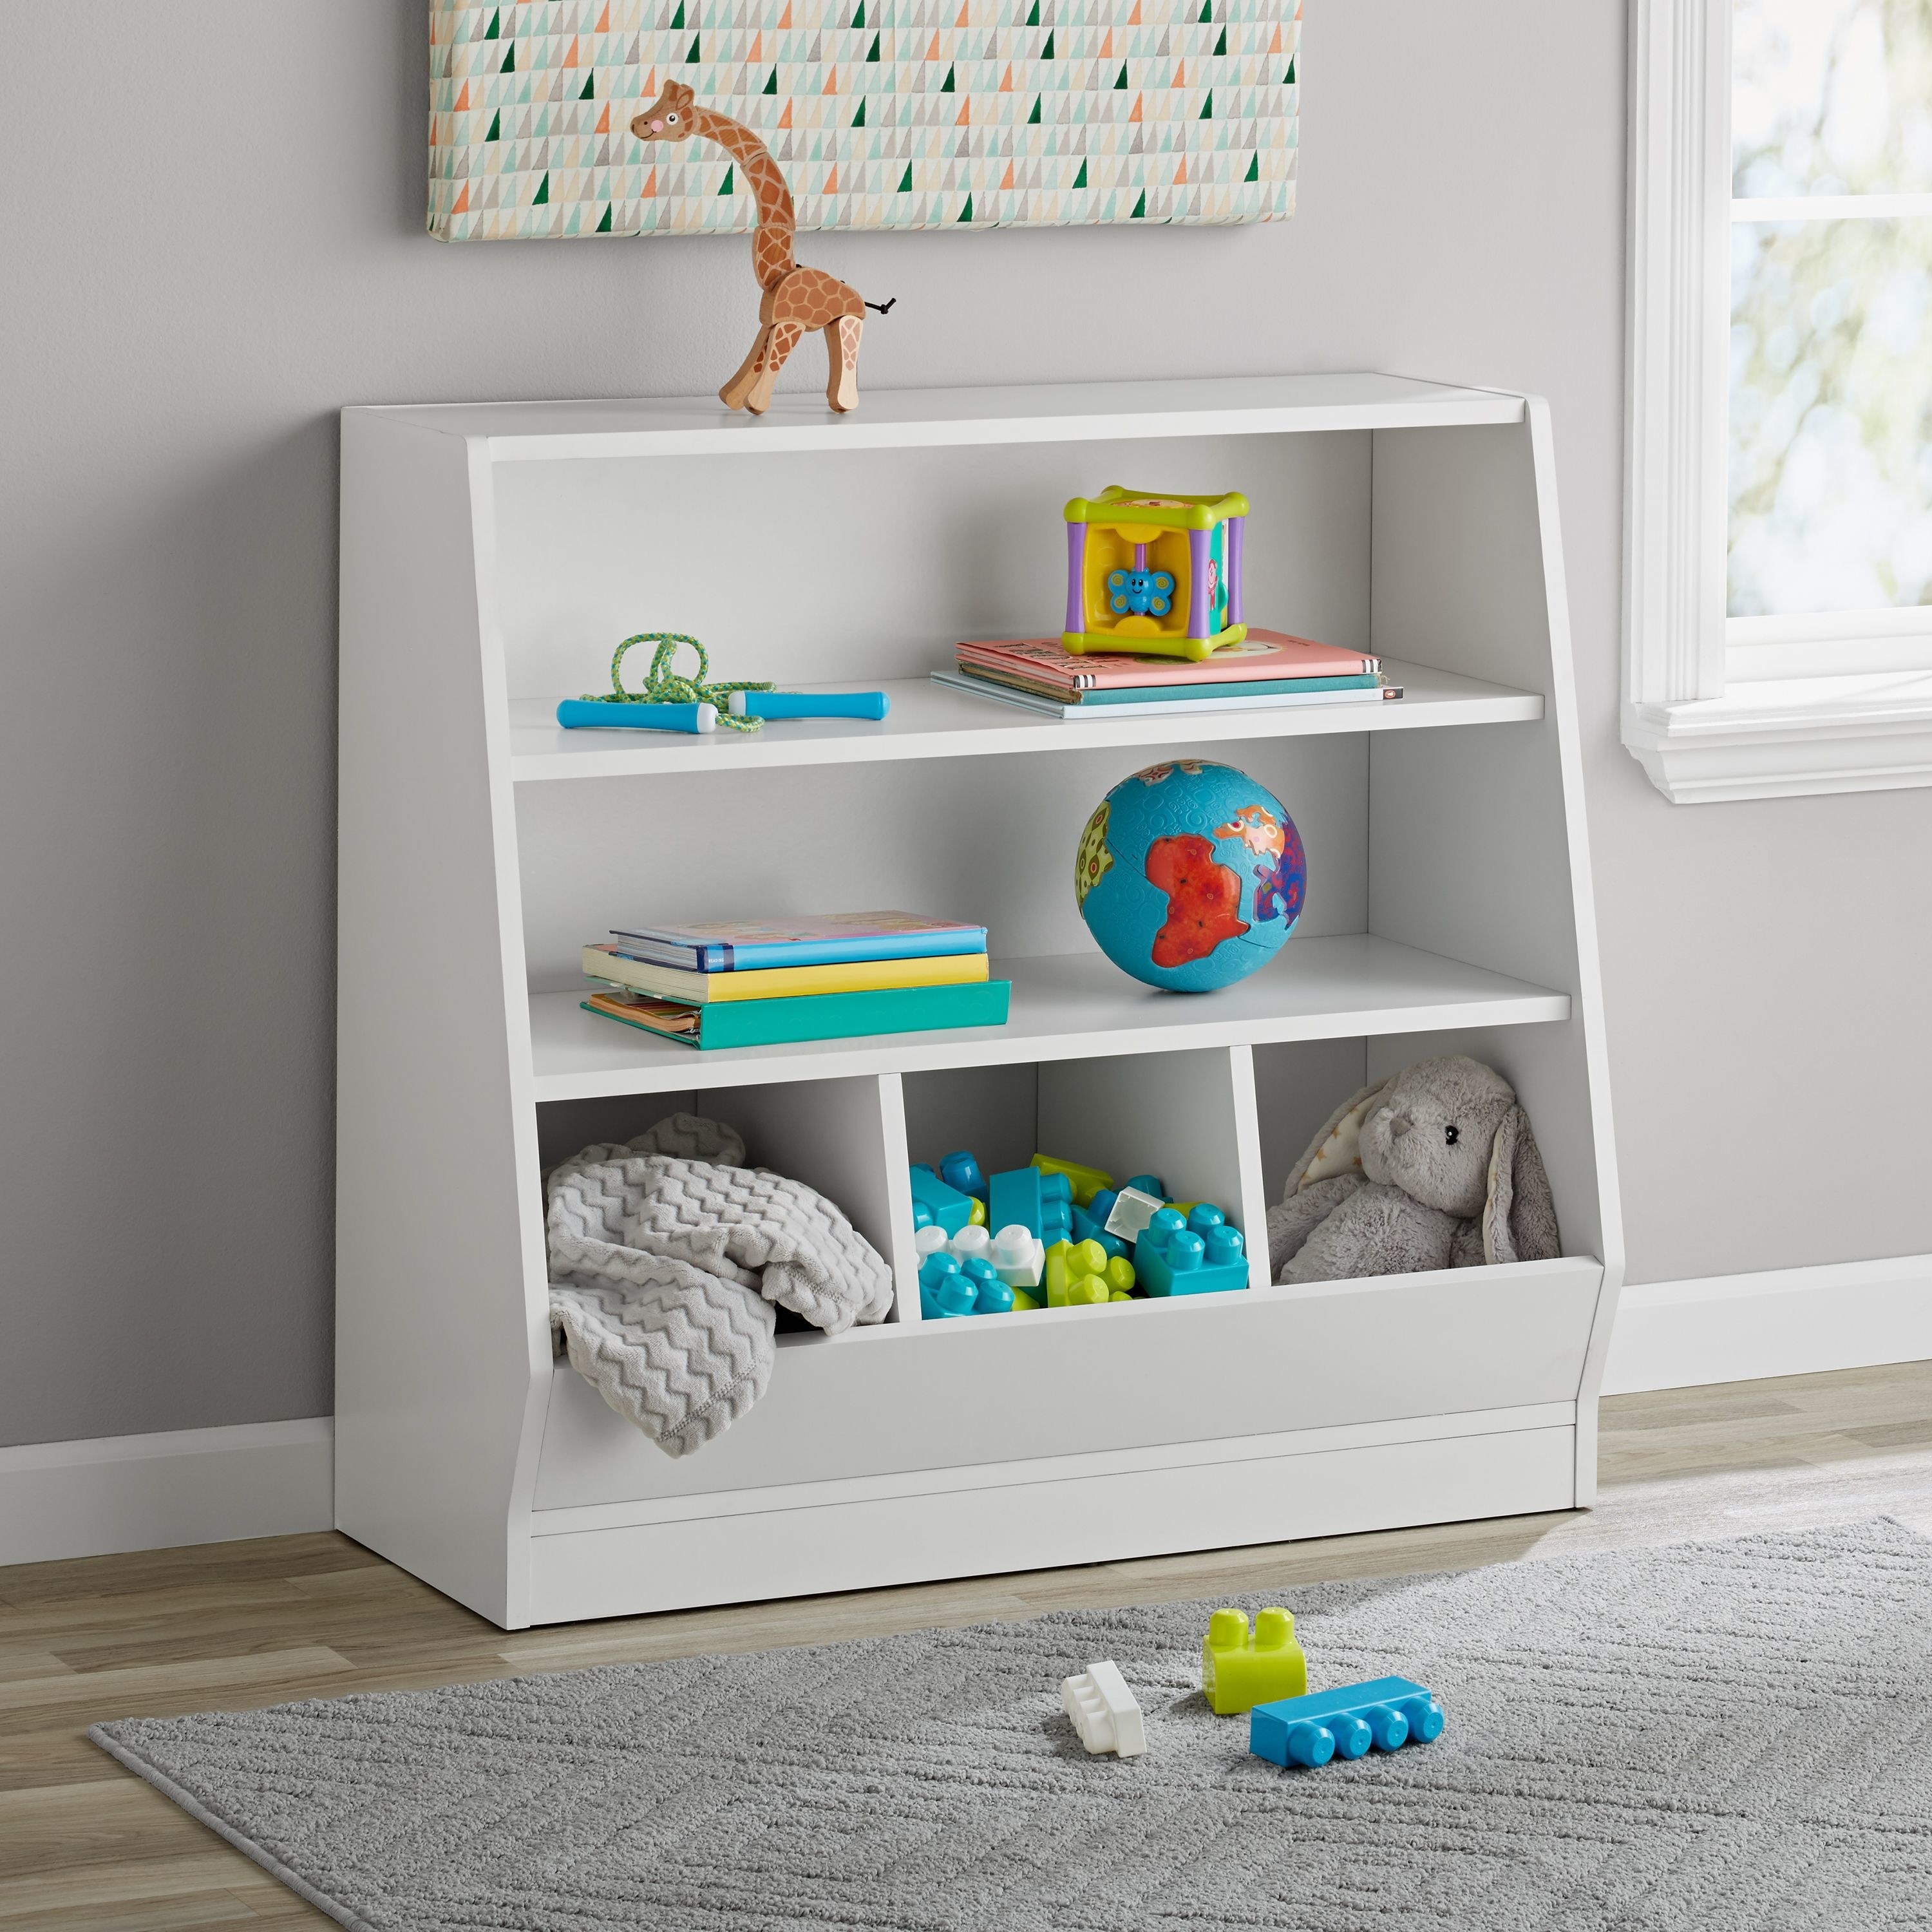 The white bookshelf and bin with toys